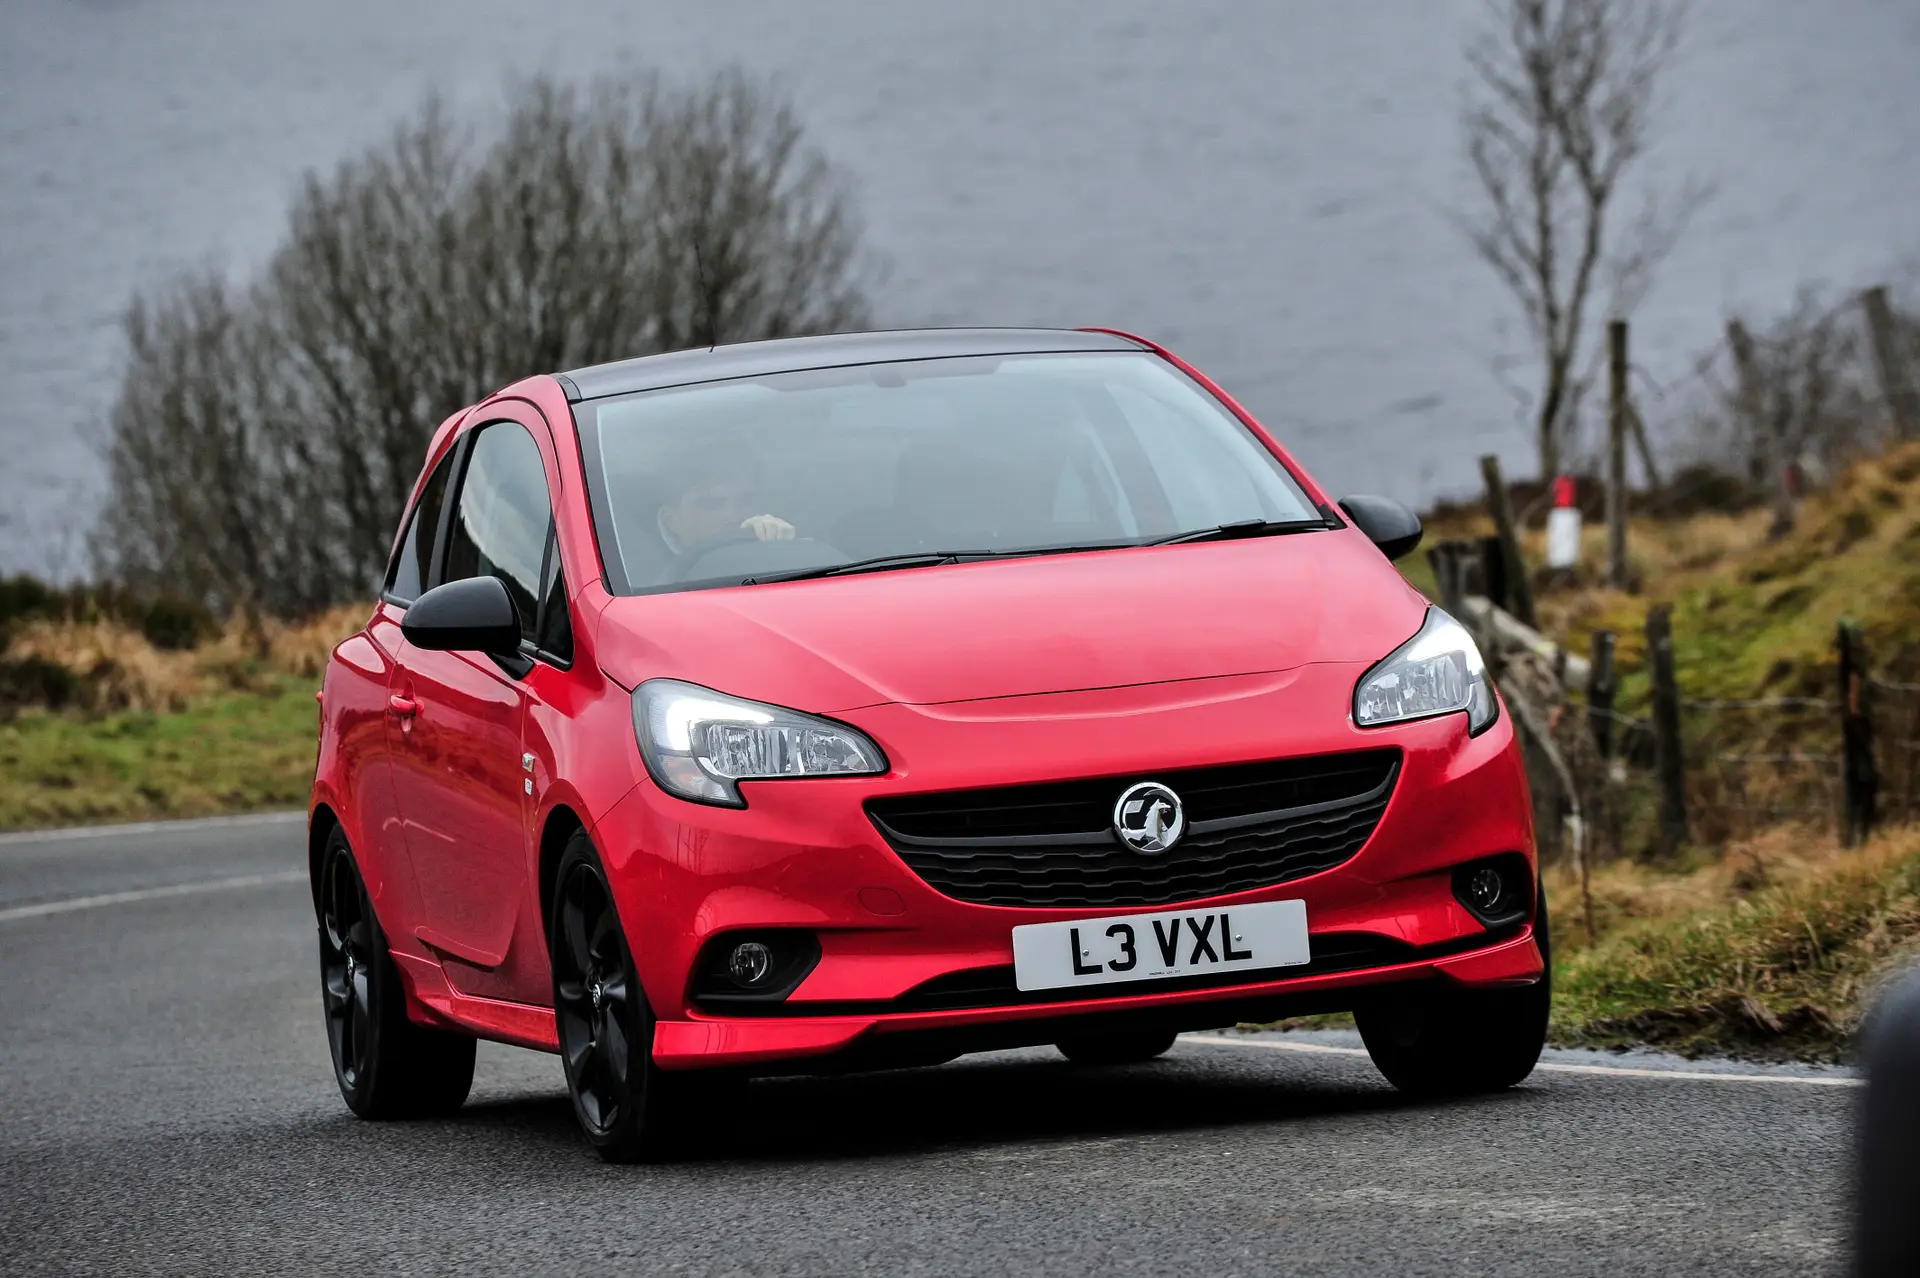 Used Vauxhall Corsa (2014-2019) Review: exterior front three quarter photo of the Vauxhall Corsa on the road